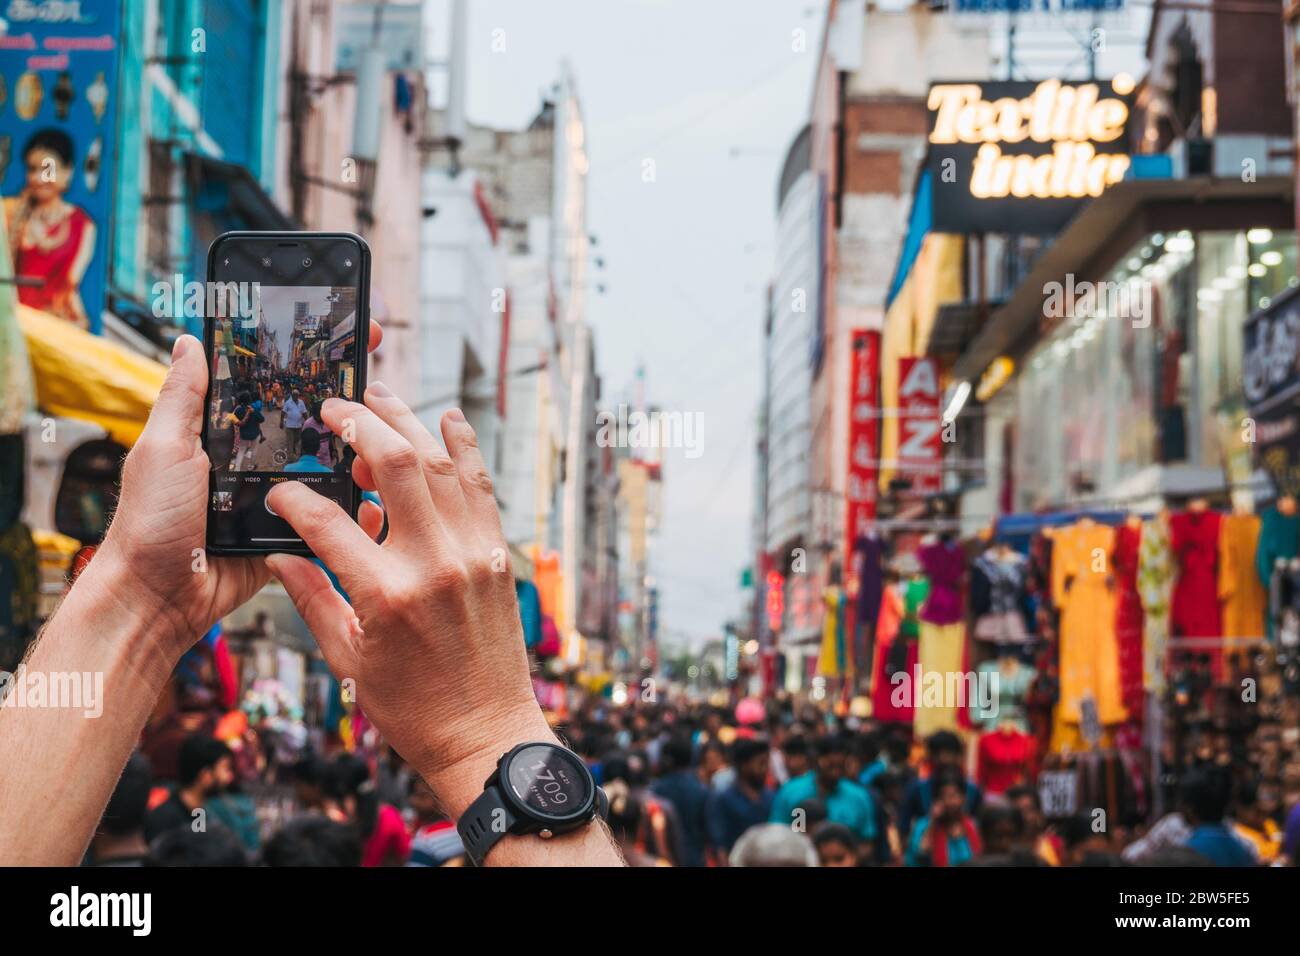 https://c8.alamy.com/comp/2BW5FE5/a-tourist-uses-their-phone-to-take-a-photo-of-a-busy-ranganathan-street-touted-as-one-of-the-most-crowded-streets-in-the-world-in-chennai-india-2BW5FE5.jpg